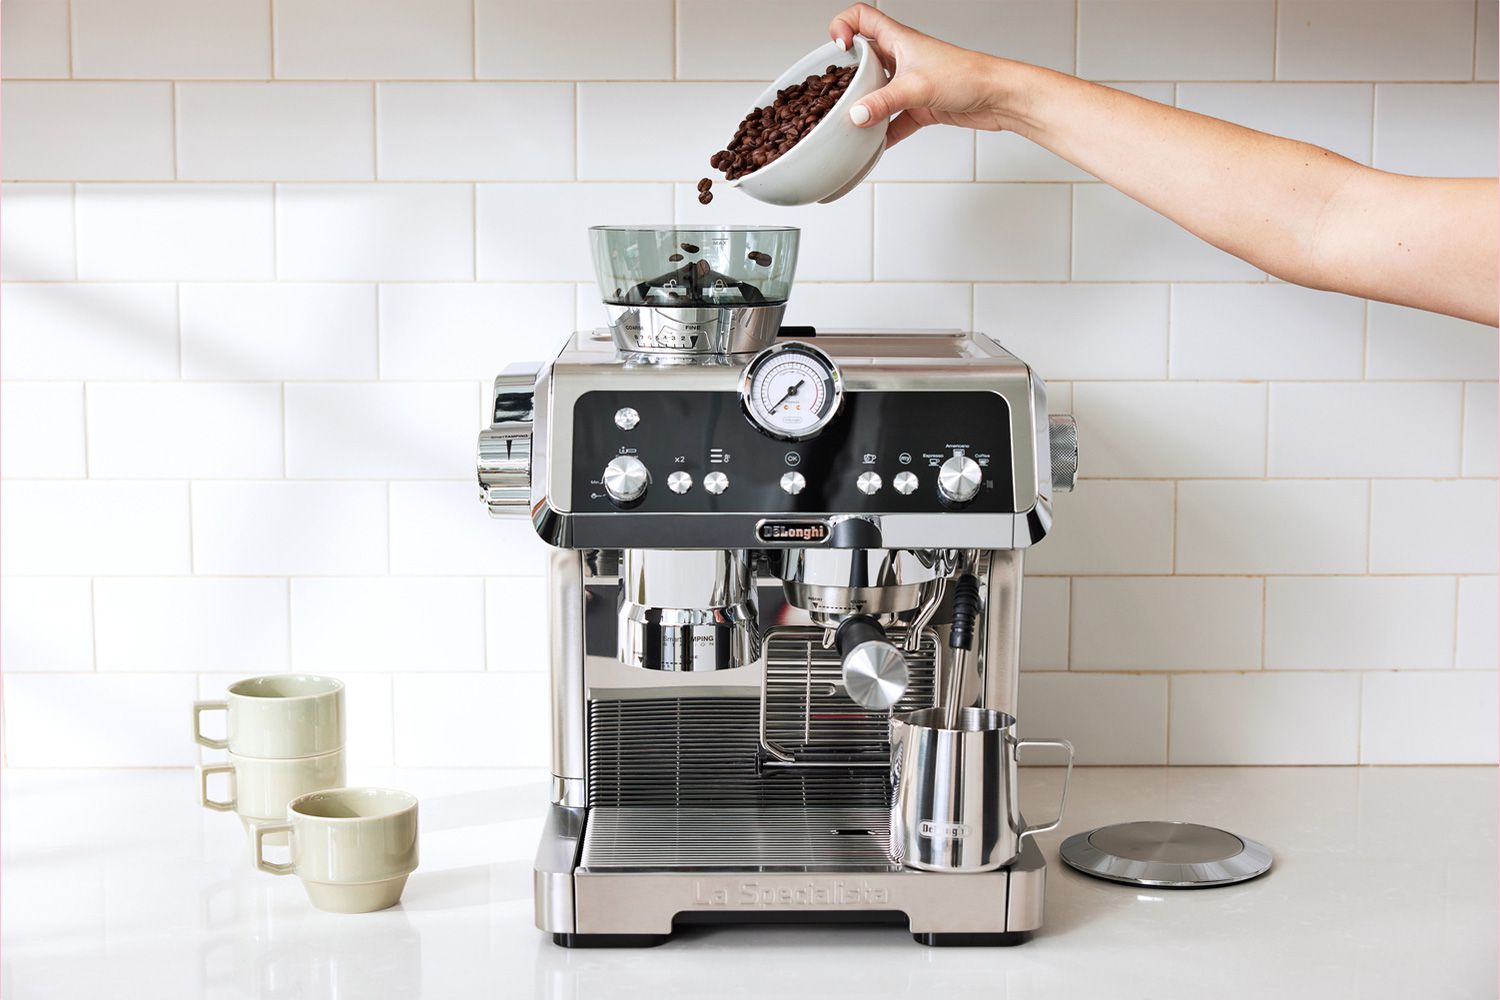 Coffee Machine Repair Service: Learn more about it